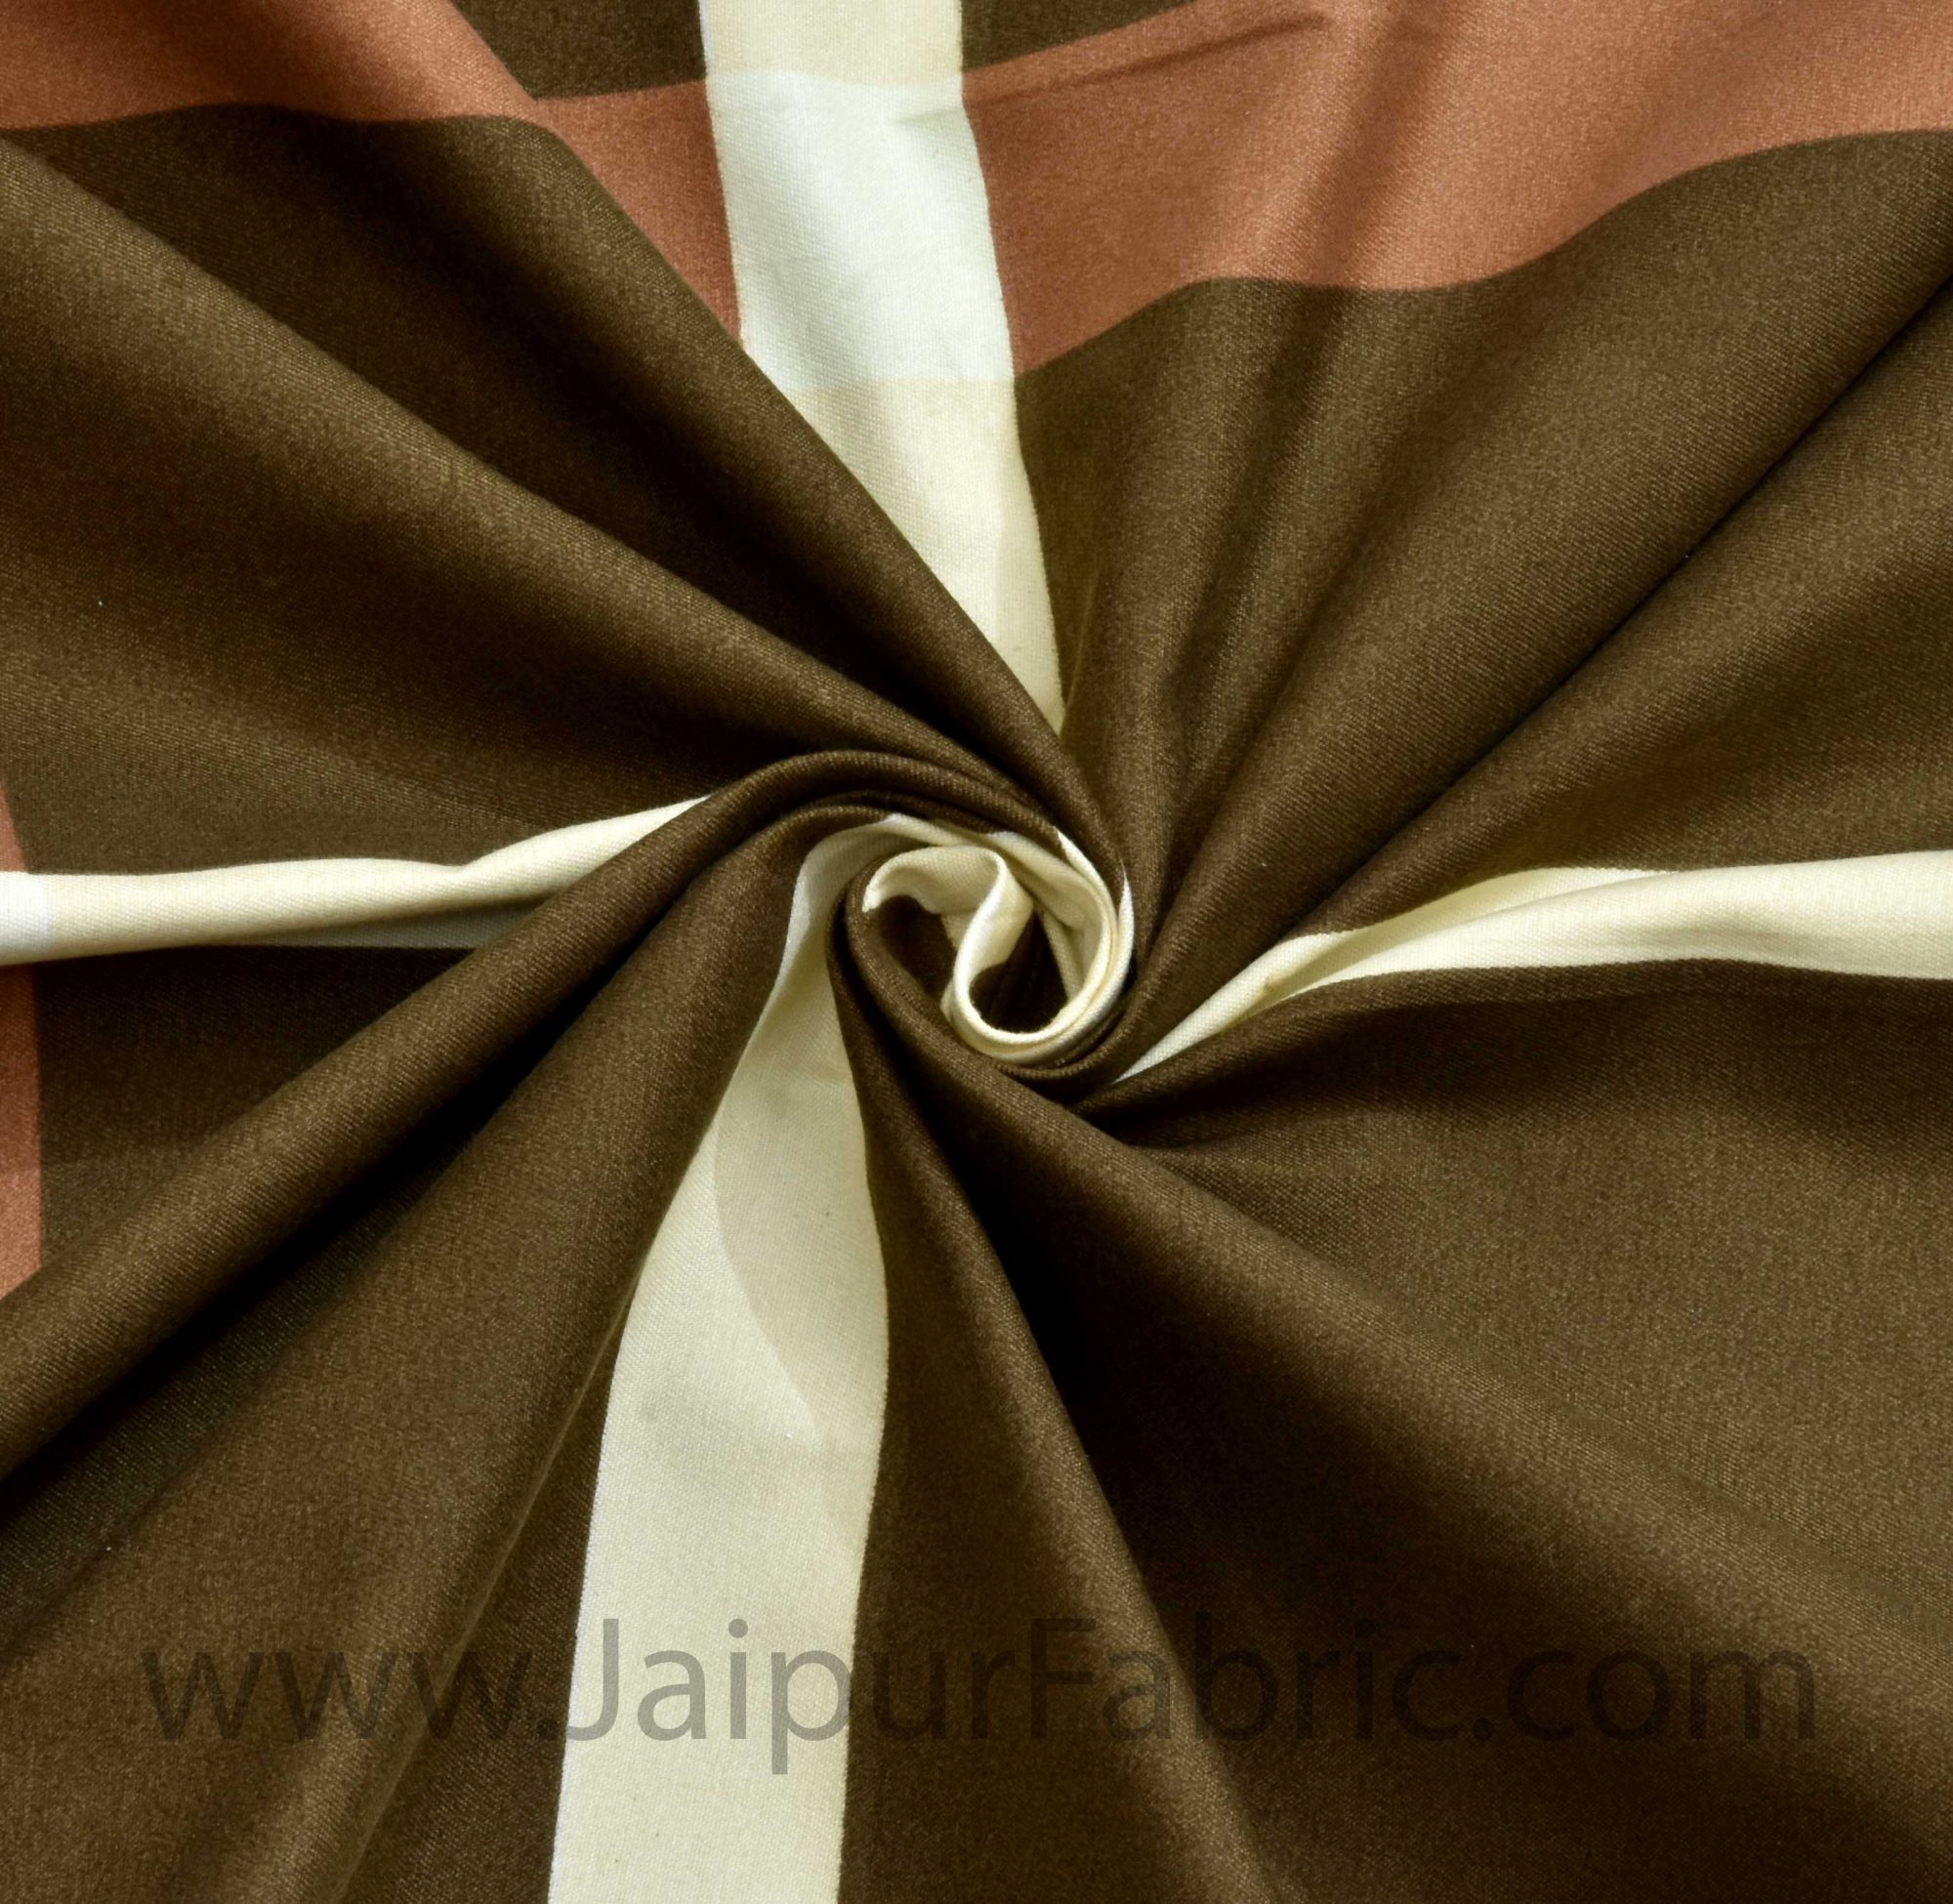 Quality Quad Brown Double Bedsheet